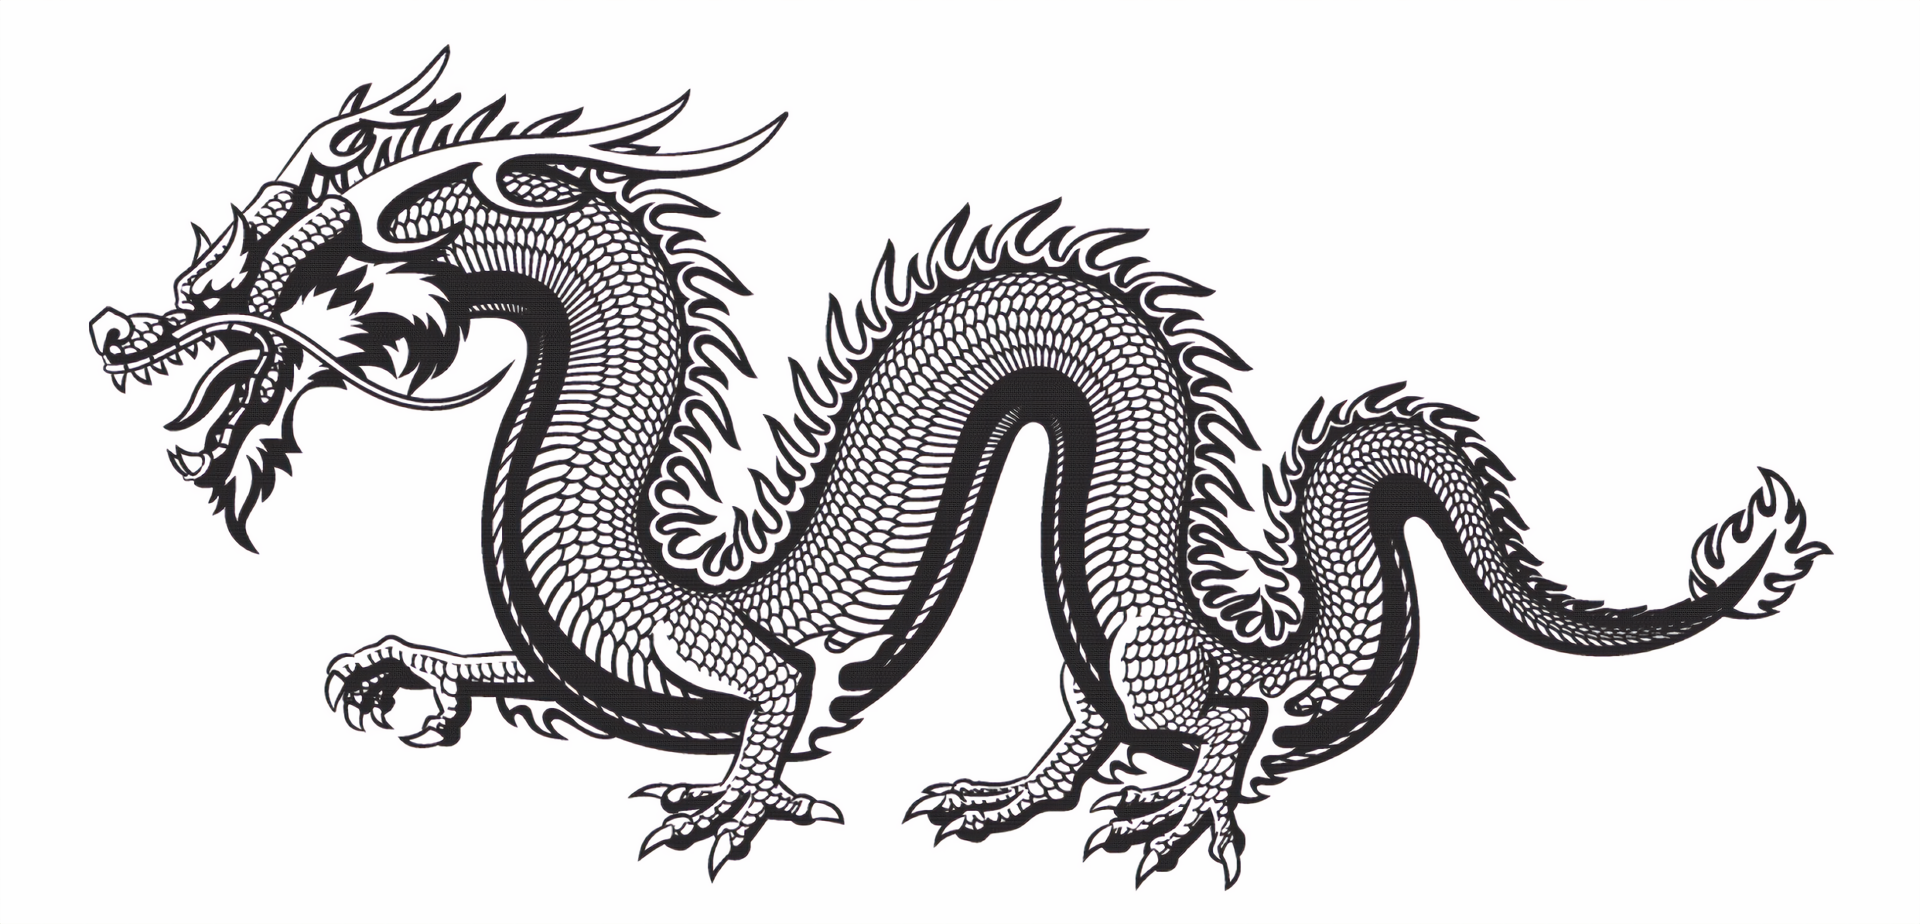 General 1920x924 dragon simple background white background Chinese dragon